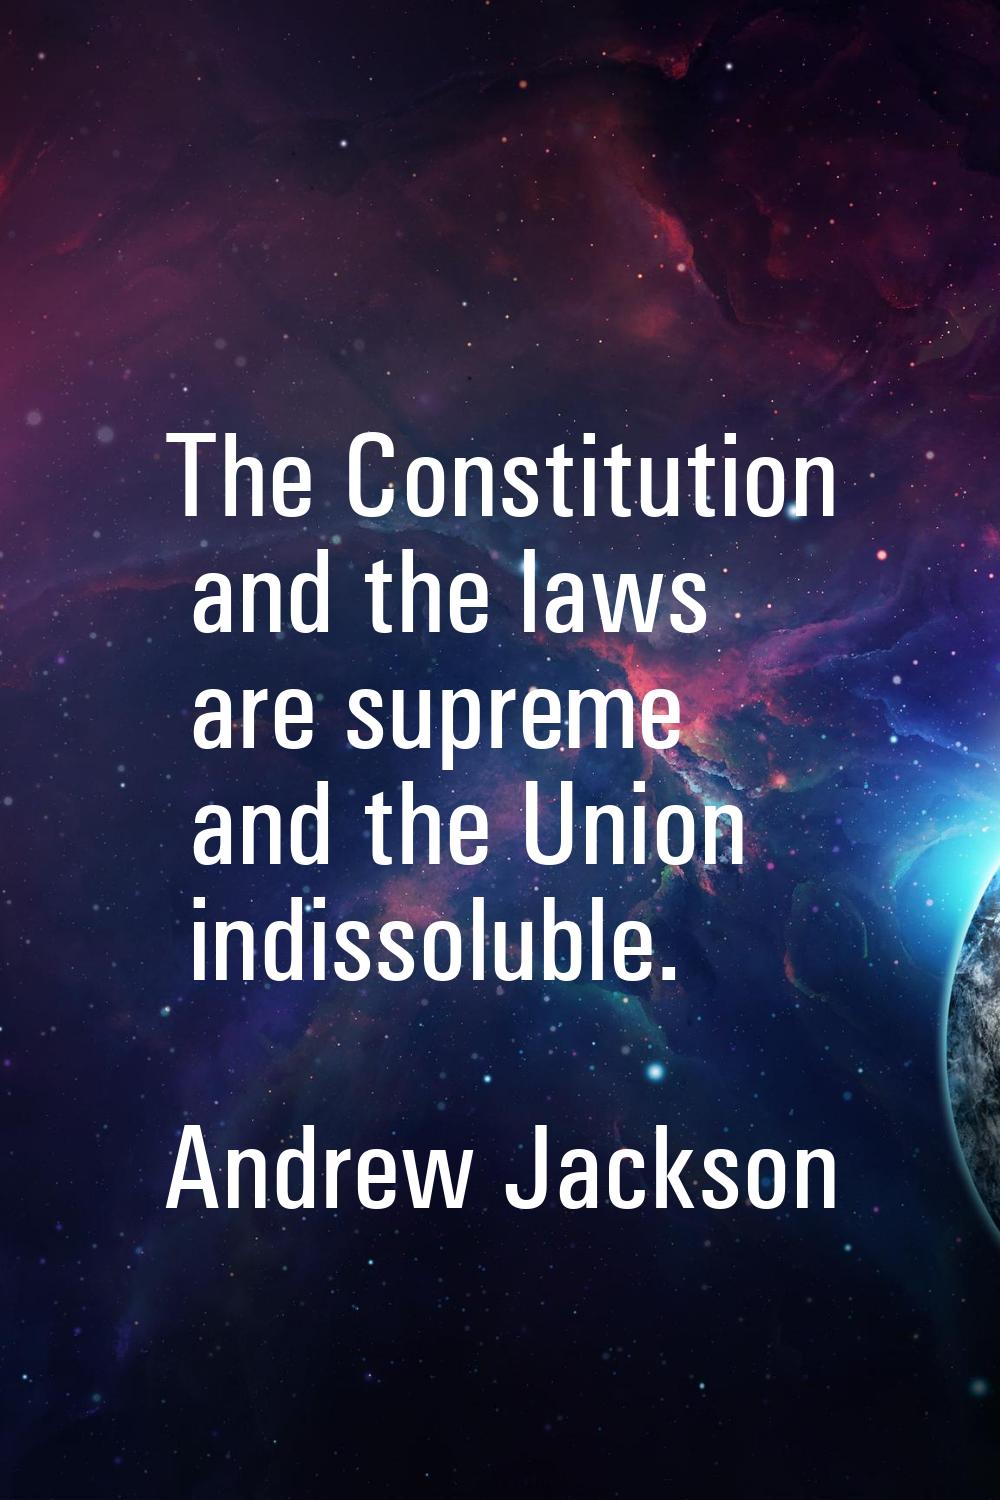 The Constitution and the laws are supreme and the Union indissoluble.